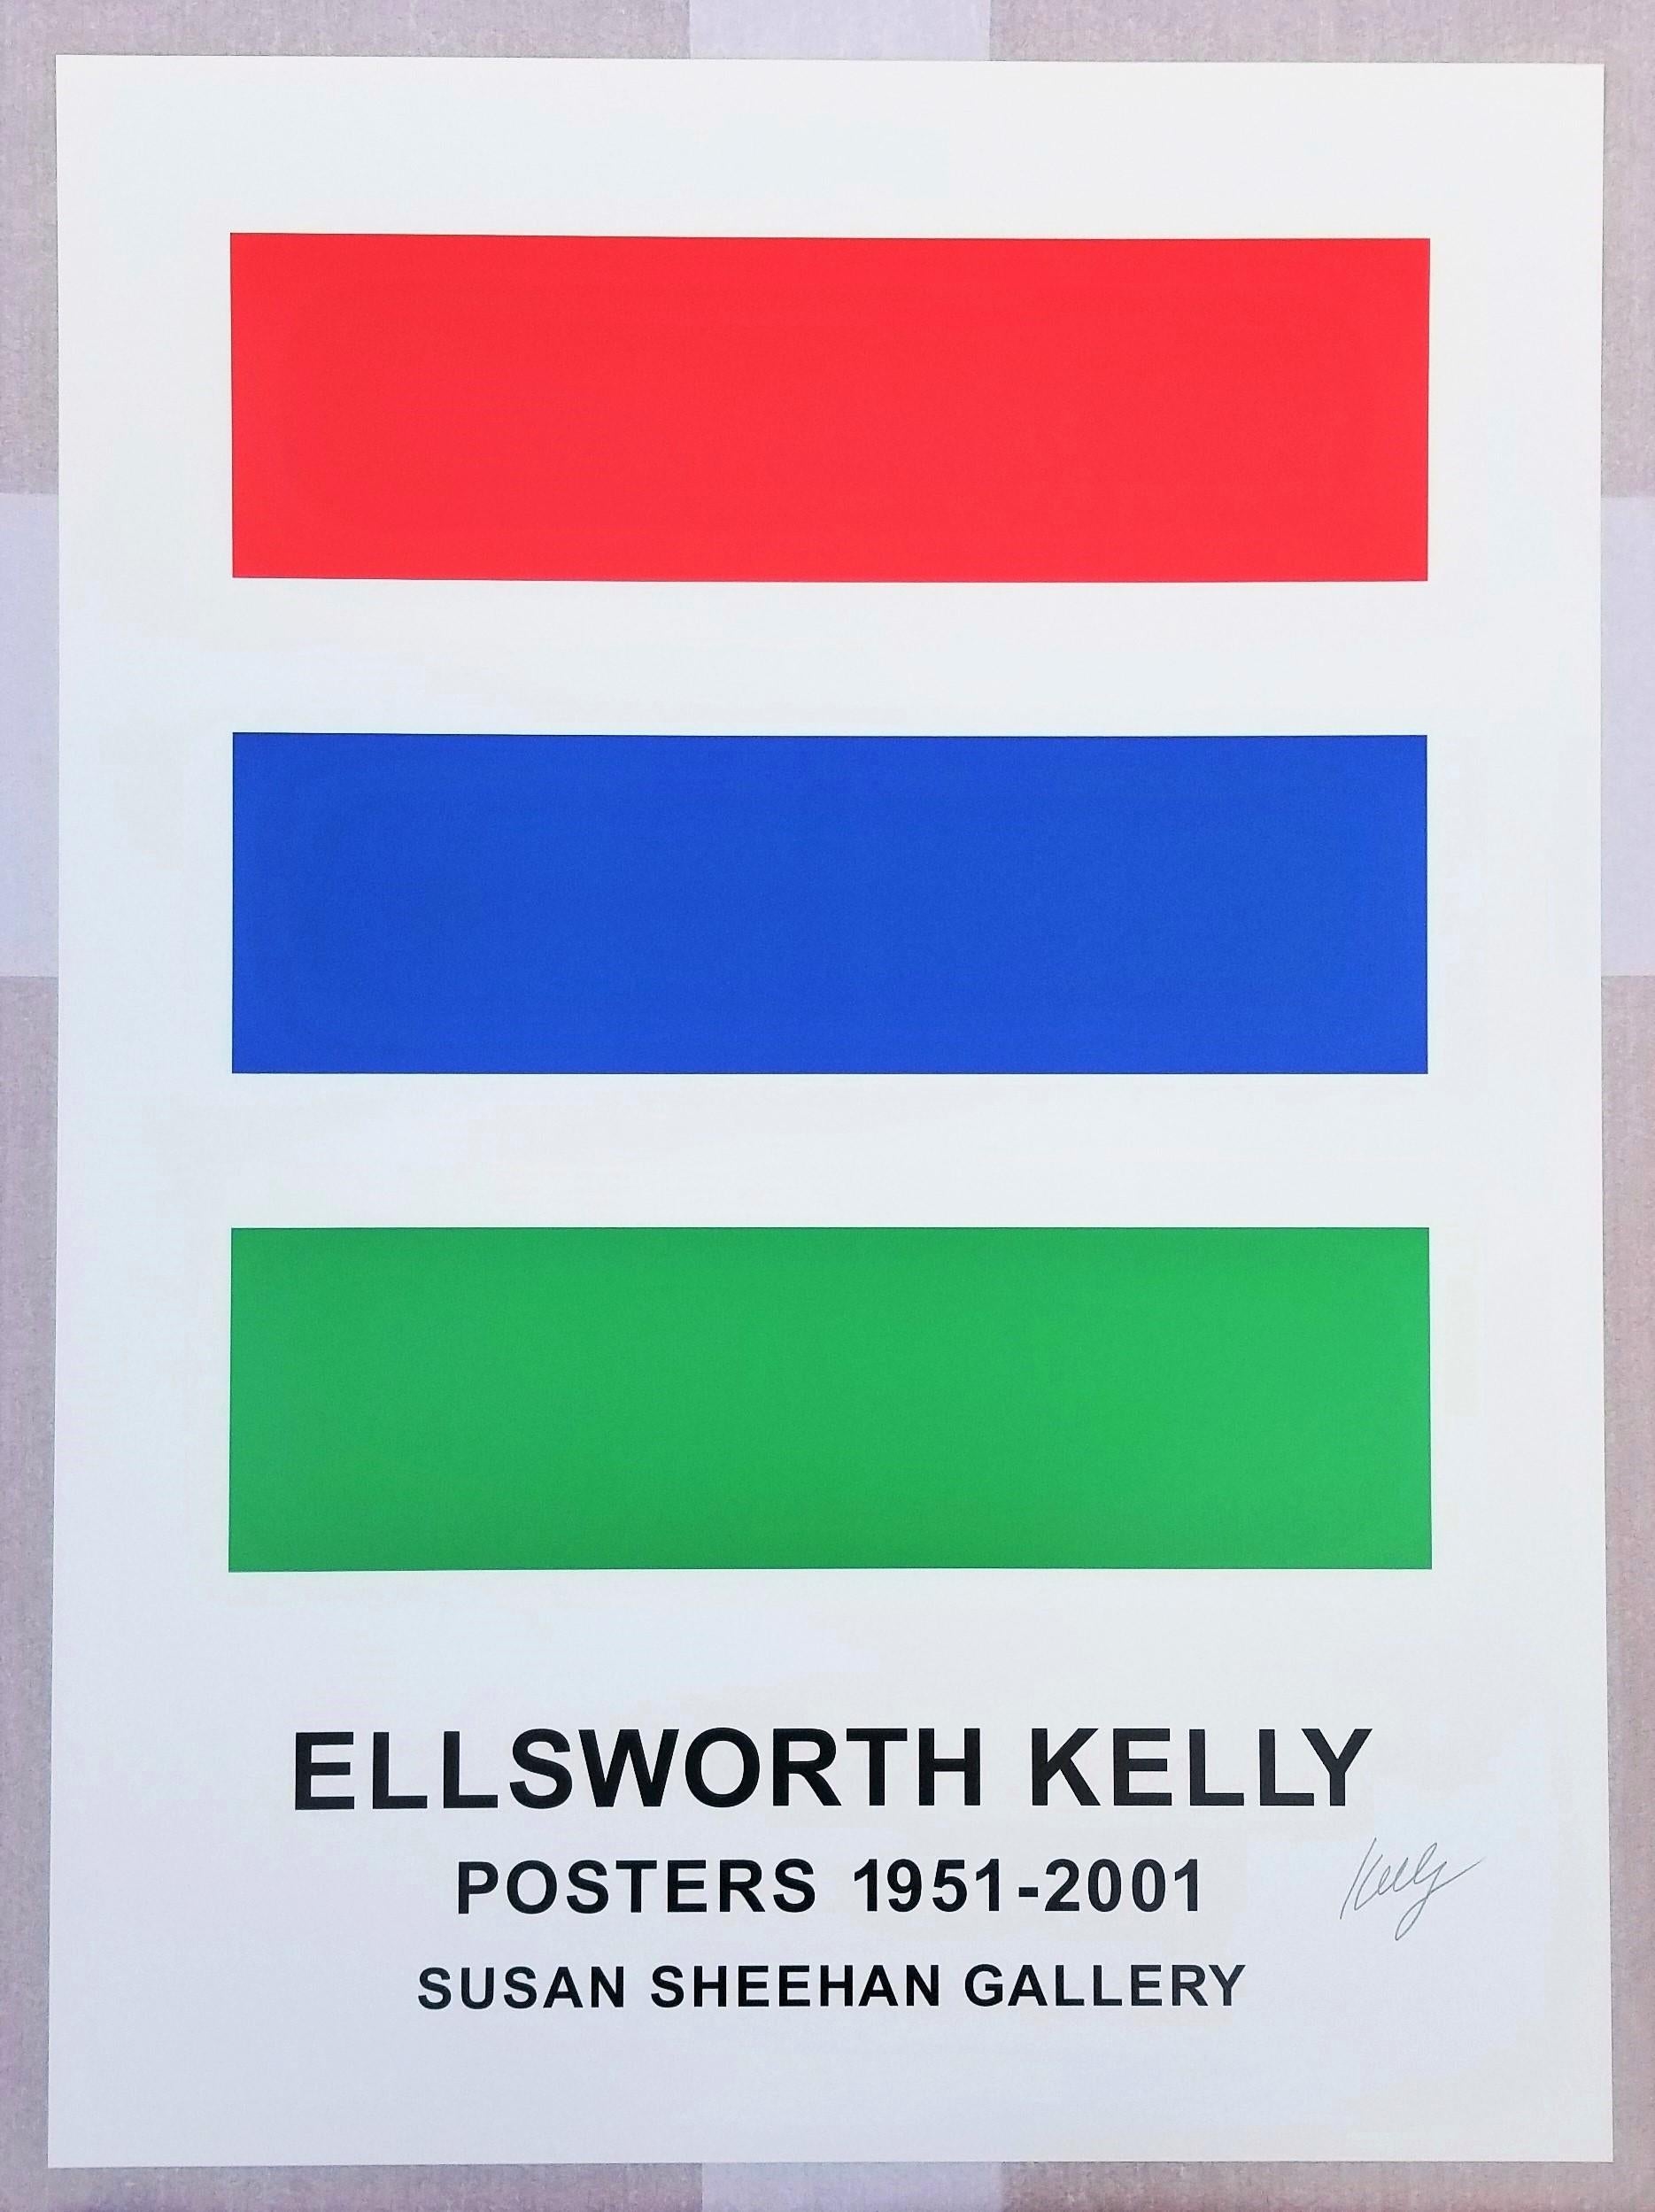 Susan Sheehan Gallery (Ellsworth Kelly Posters 1951-2001) Poster (Signed) Color For Sale 1